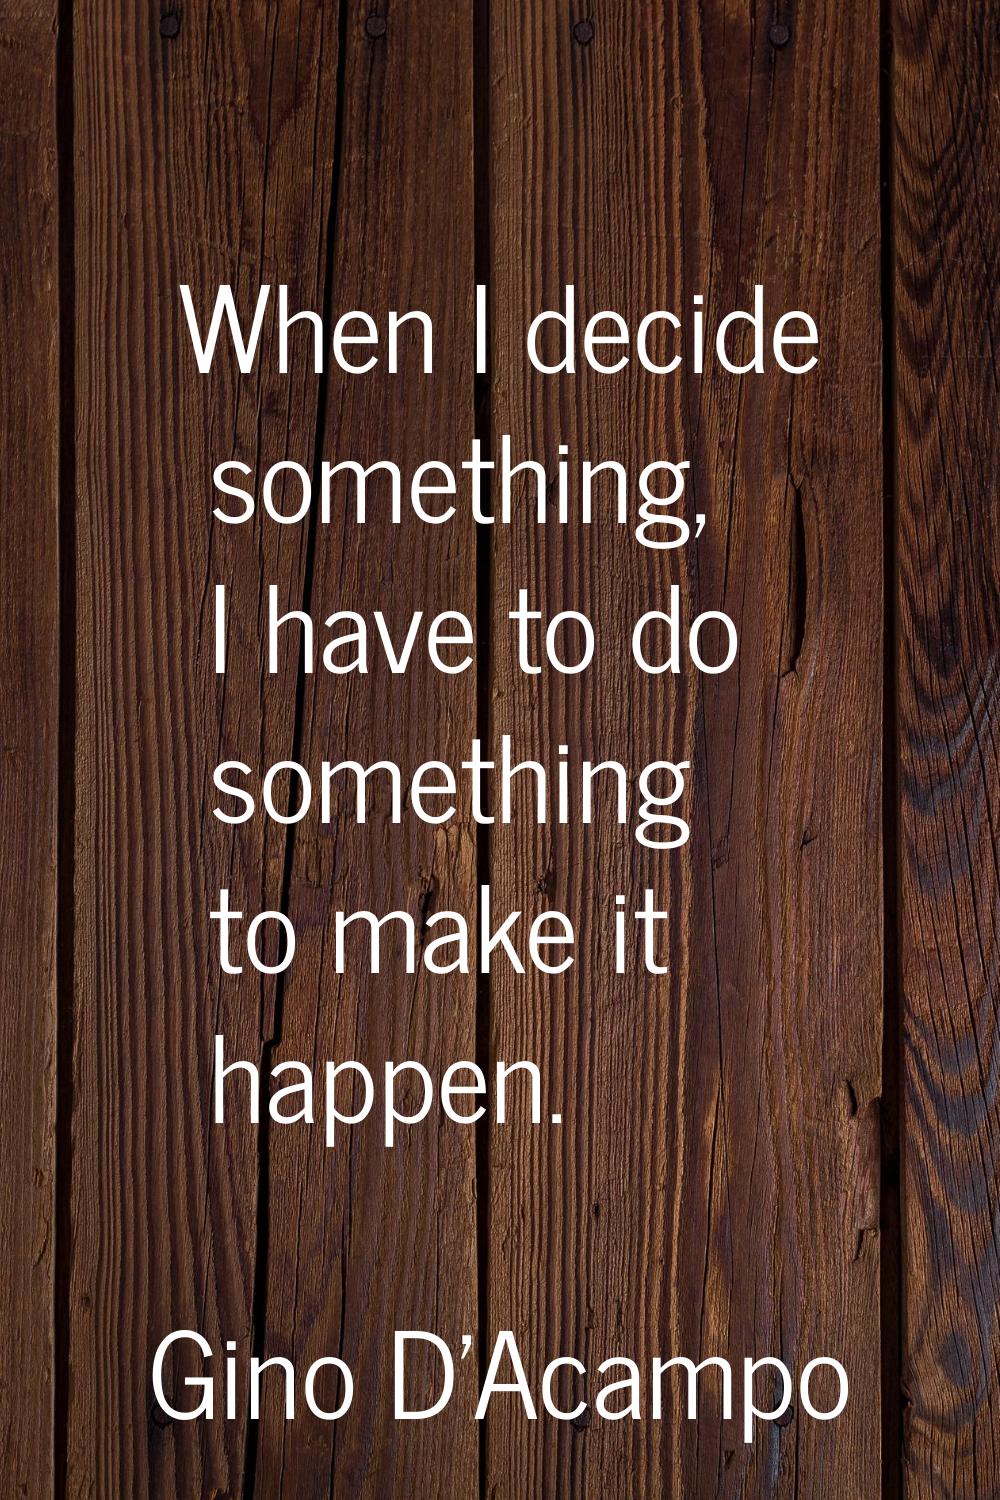 When I decide something, I have to do something to make it happen.